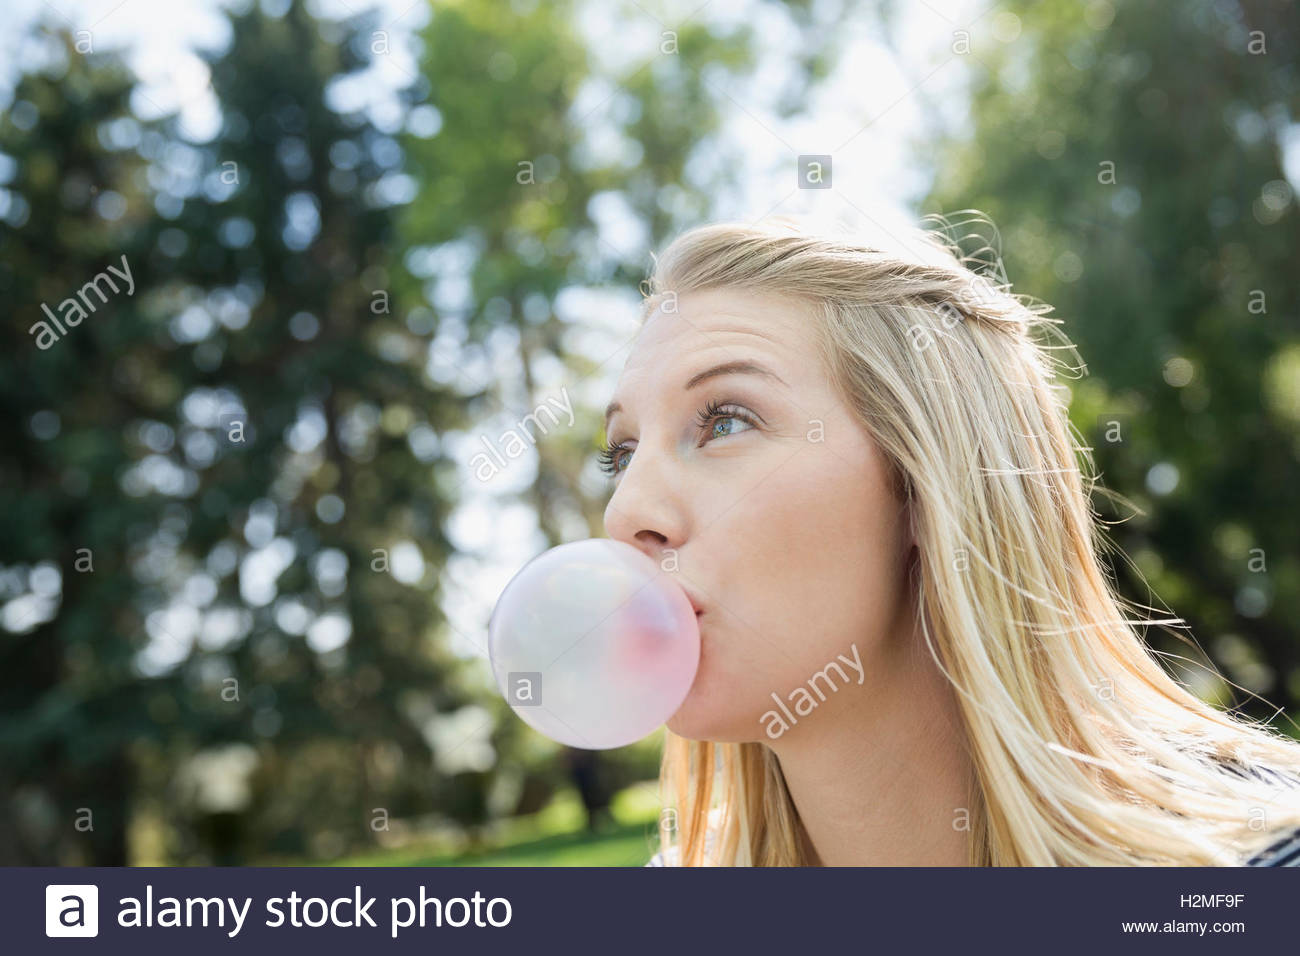 Wide-eyed blonde woman blowing bubble with bubble gum in park Stock Photo